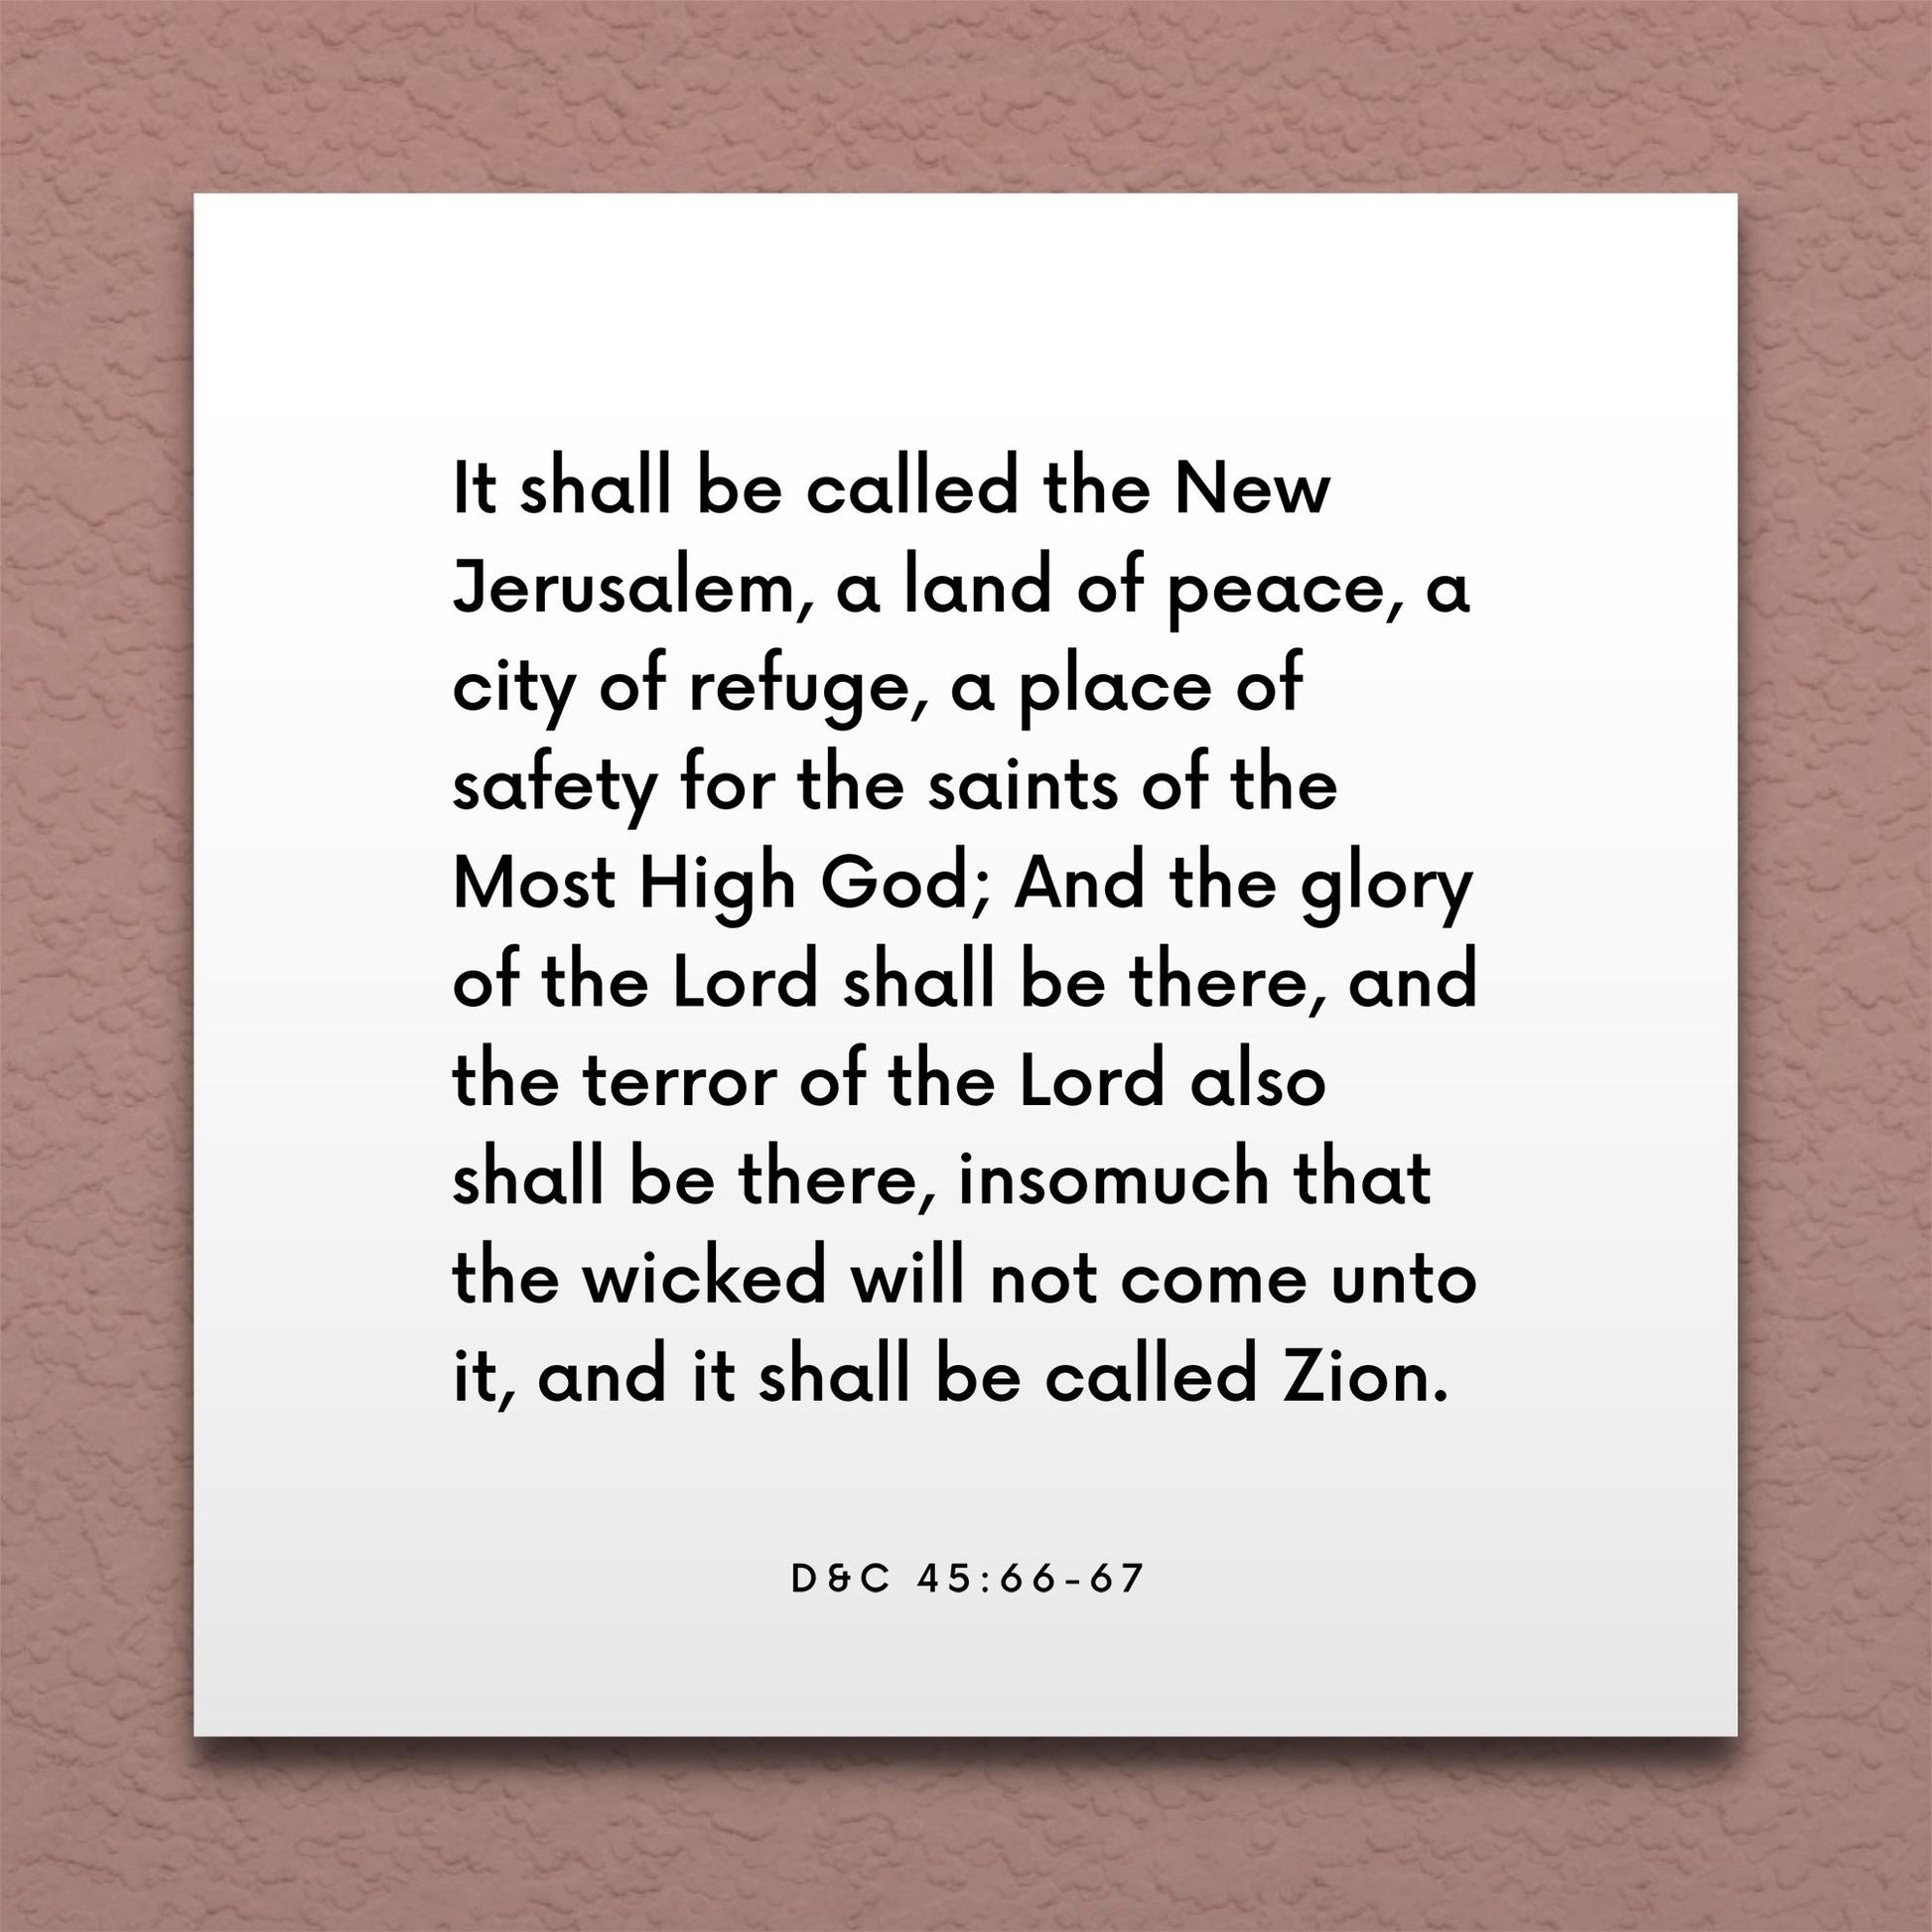 Wall-mounted scripture tile for D&C 45:66-67 - "It shall be called the New Jerusalem"